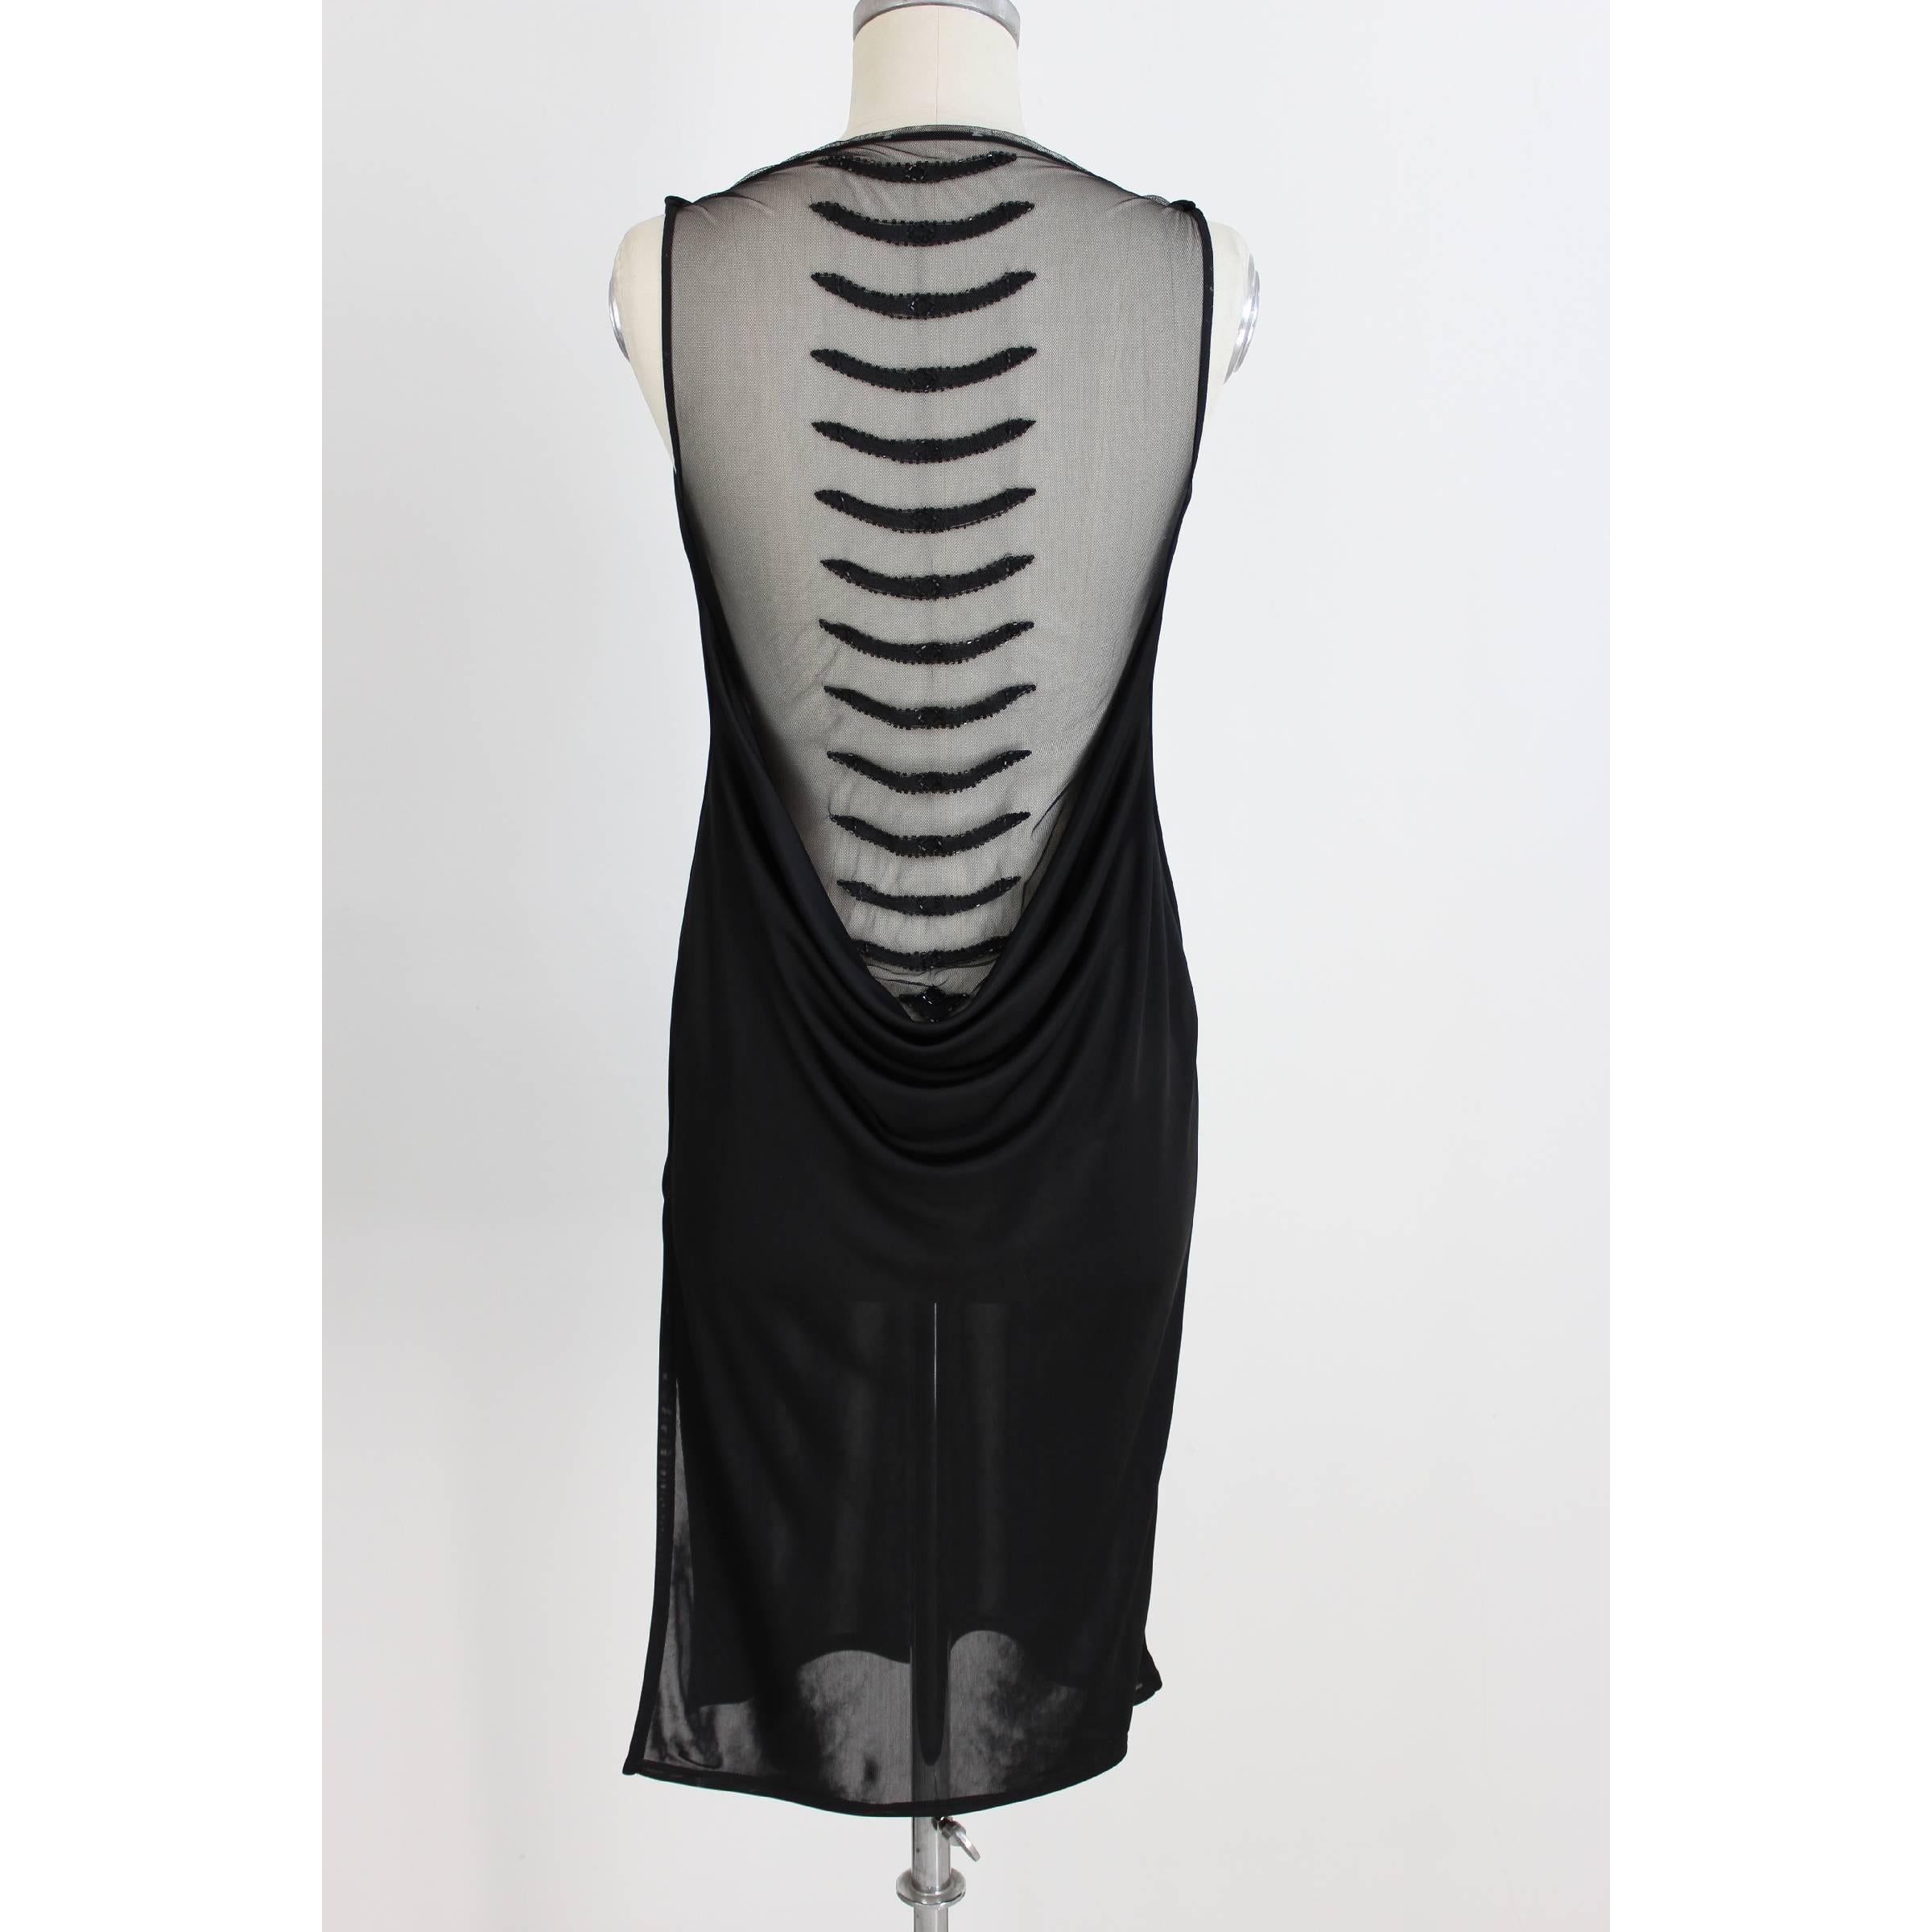 Richmond long evening dress for women. Black color. Strapless with soft neckline, down back deep necklines with transparencies and black sequins. The neckline down the back measures 55 cm. Made in Italy. Excellent vintage condition.

Size 42 Uk 8 Us